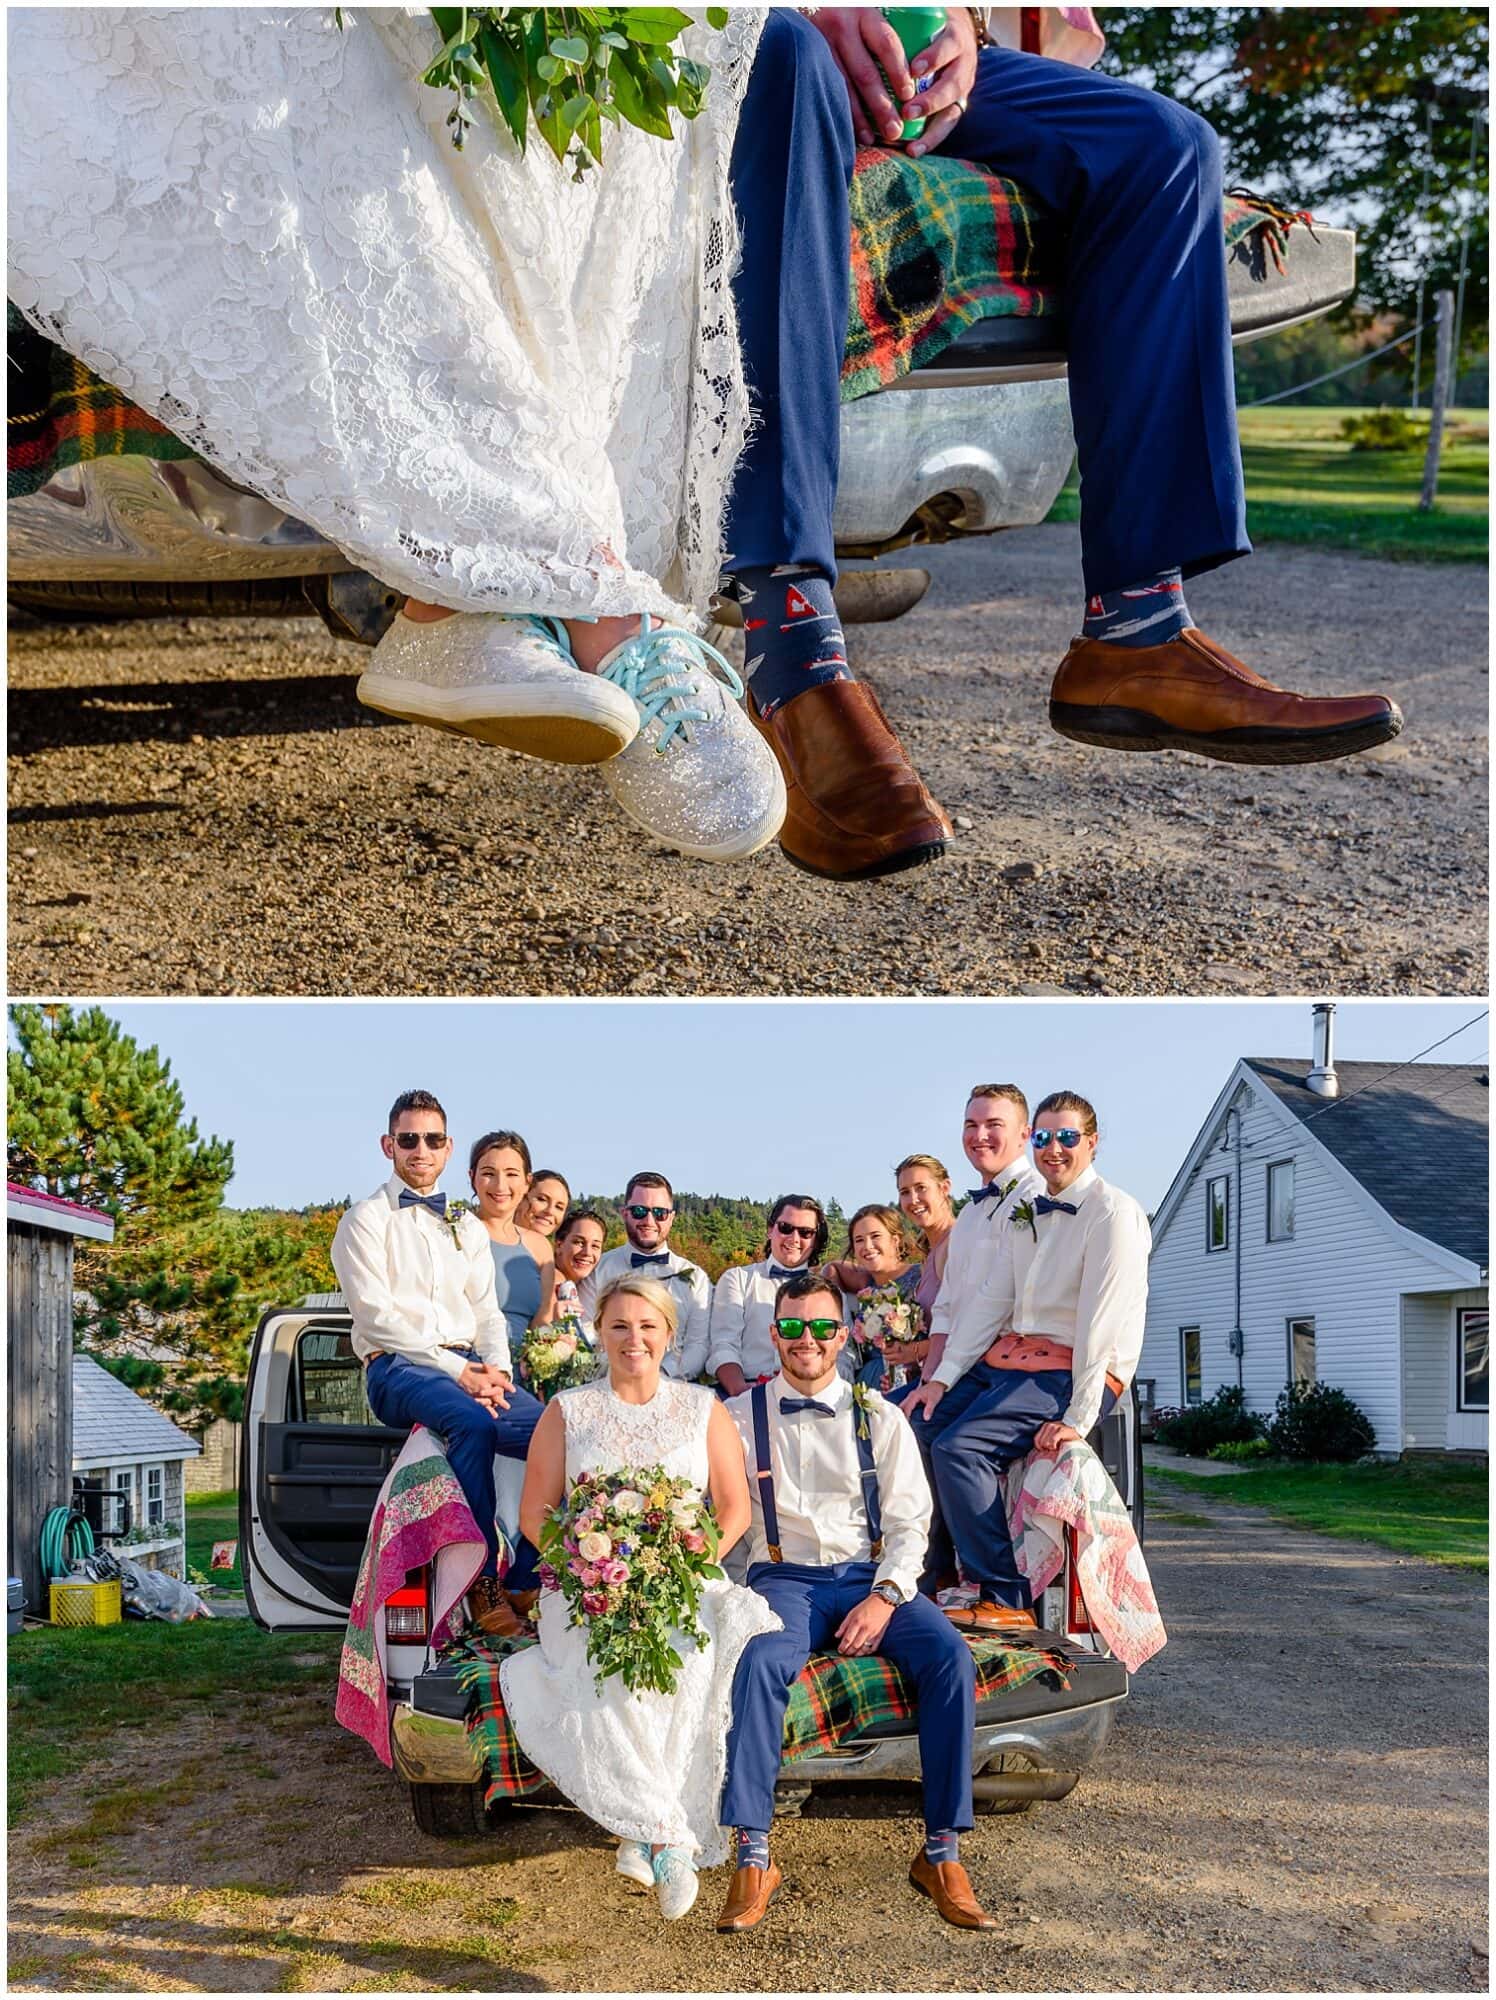 The wedding party with the bride and groom getting on a truck to go to a new location for more wedding photos at the Barn at Sadie Belle Farm.